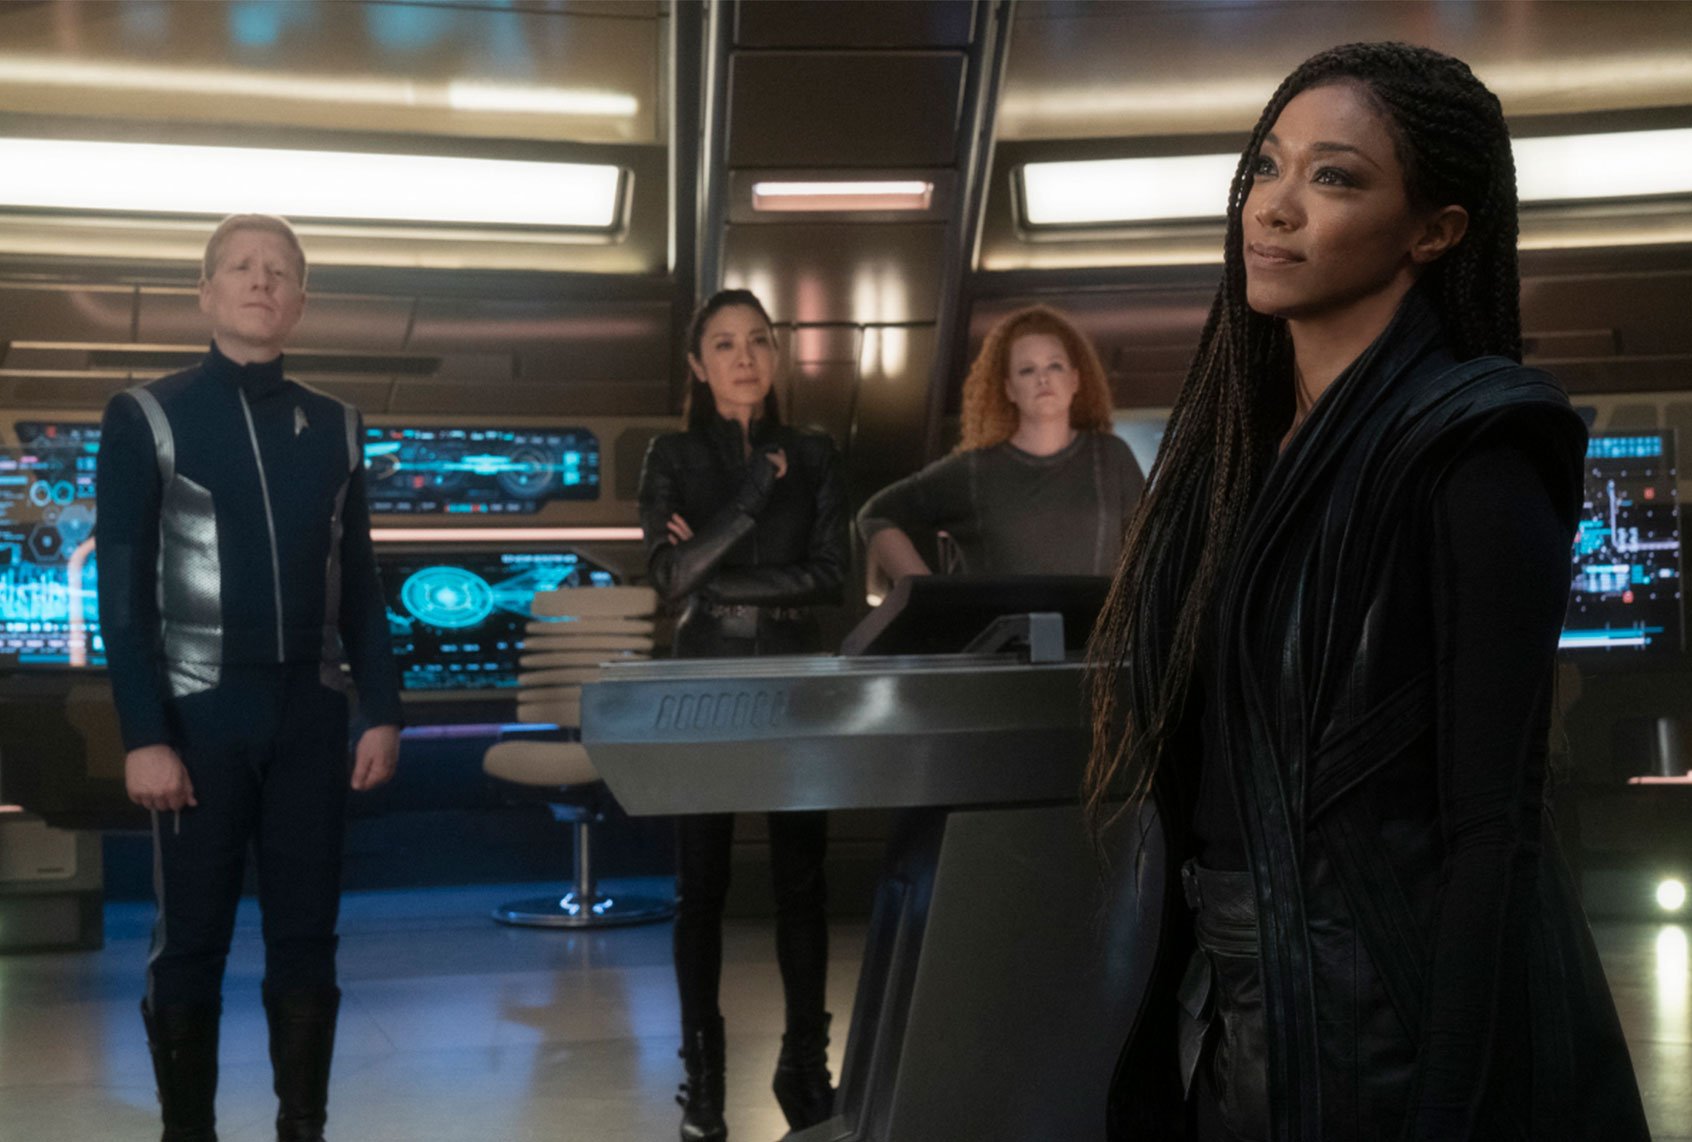 "Star Trek: Discovery" Season 3 goes boldly, where Canon did not dare to imagine life after the disaster